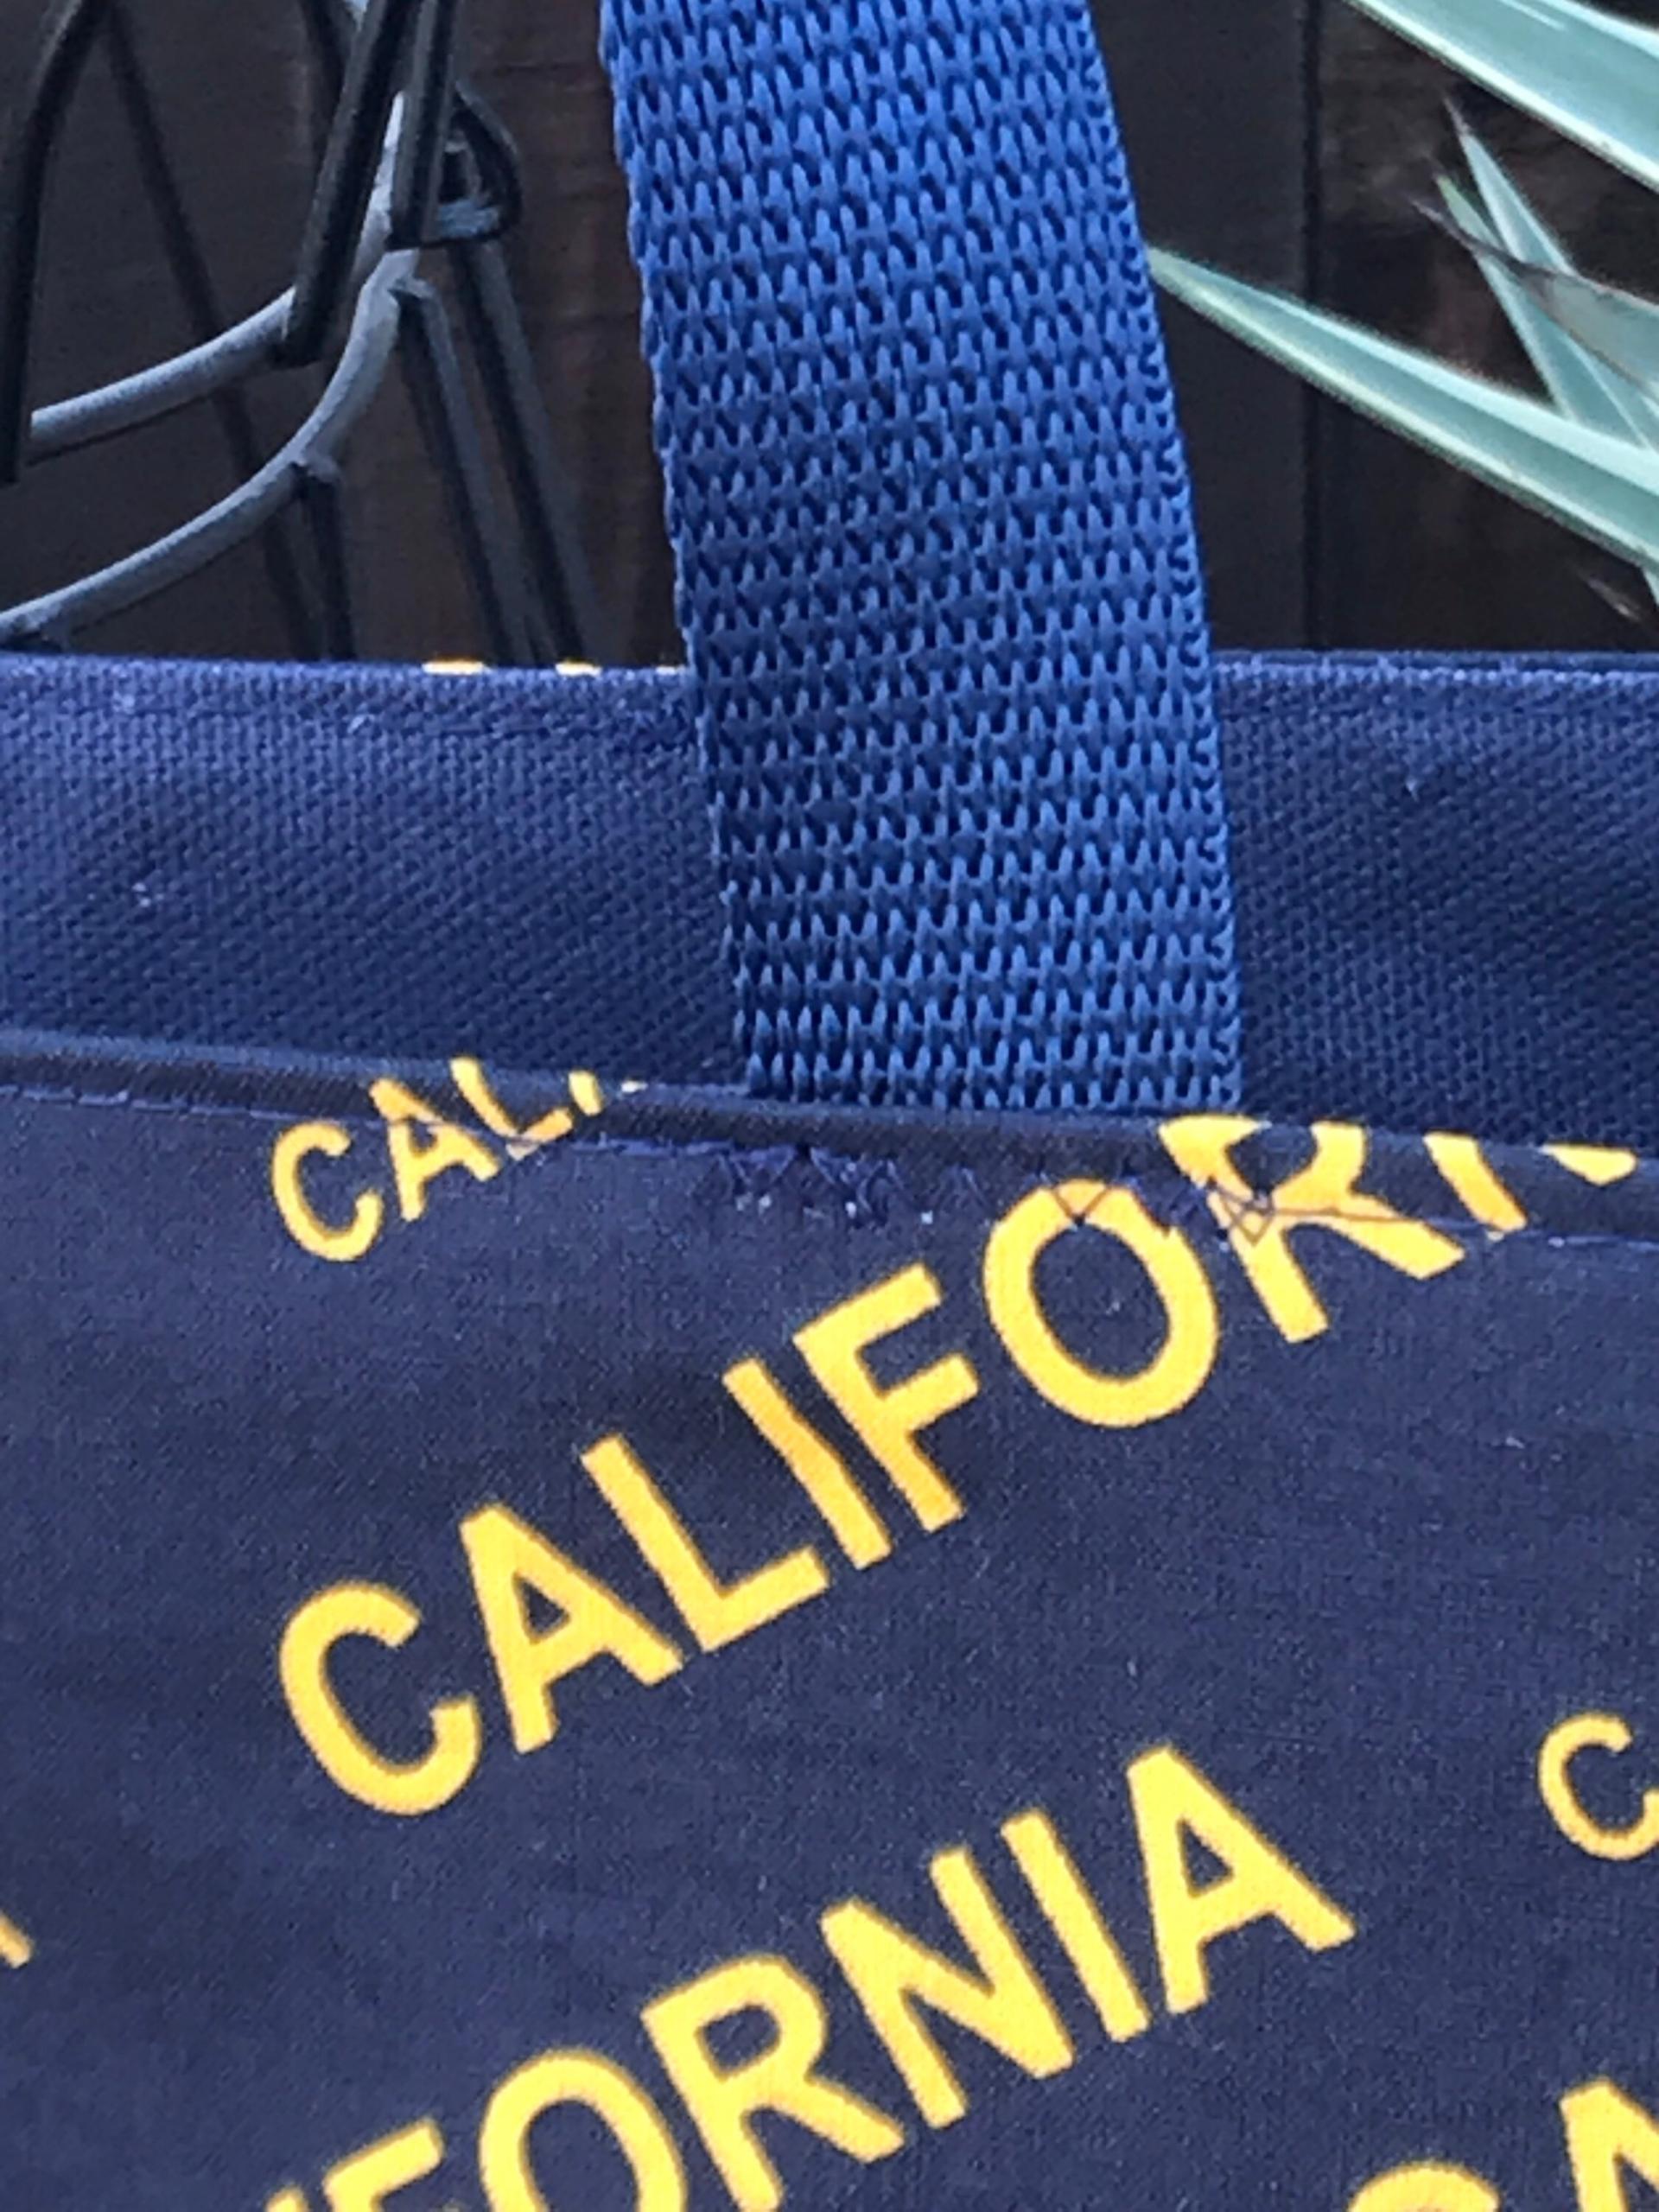 California canvas tote bag, sturdy shopping market grocery travel bag, golden state